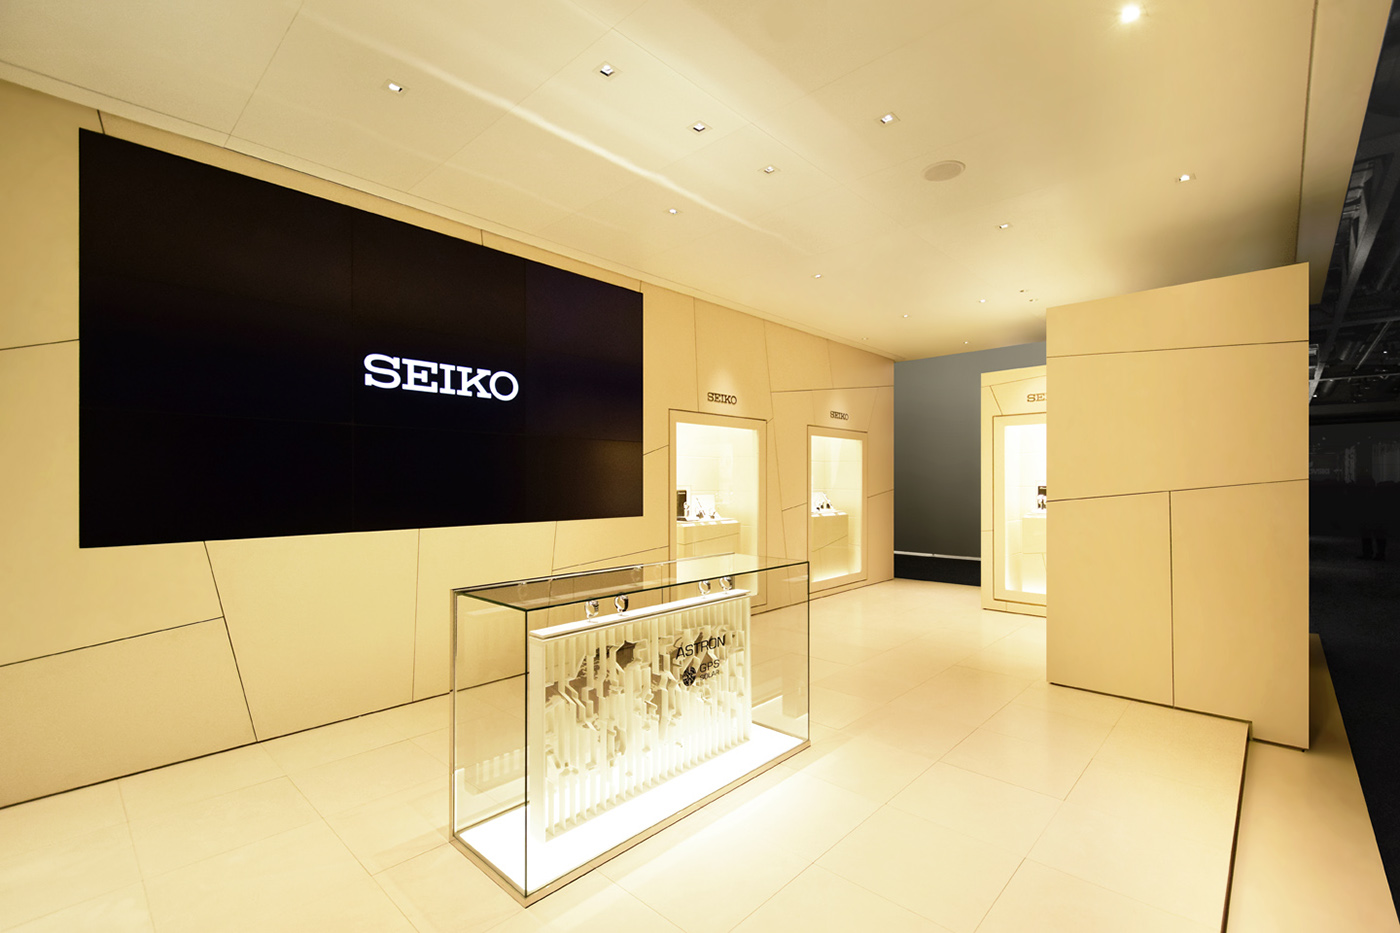 SEIKO baselworld exhibition stand messestand